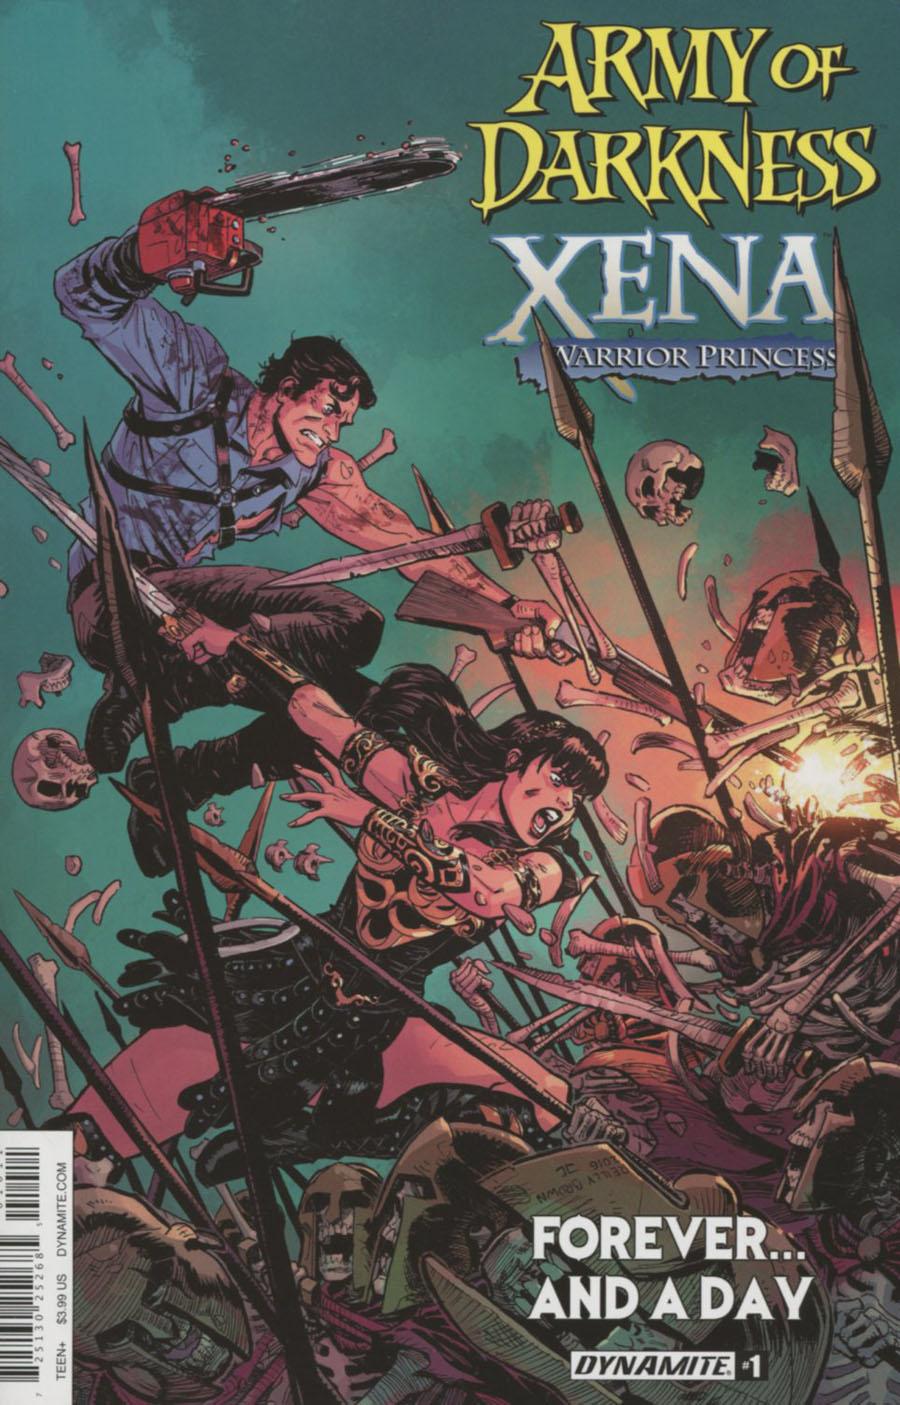 Army Of Darkness Xena Forever And A Day Vol. 1 #1